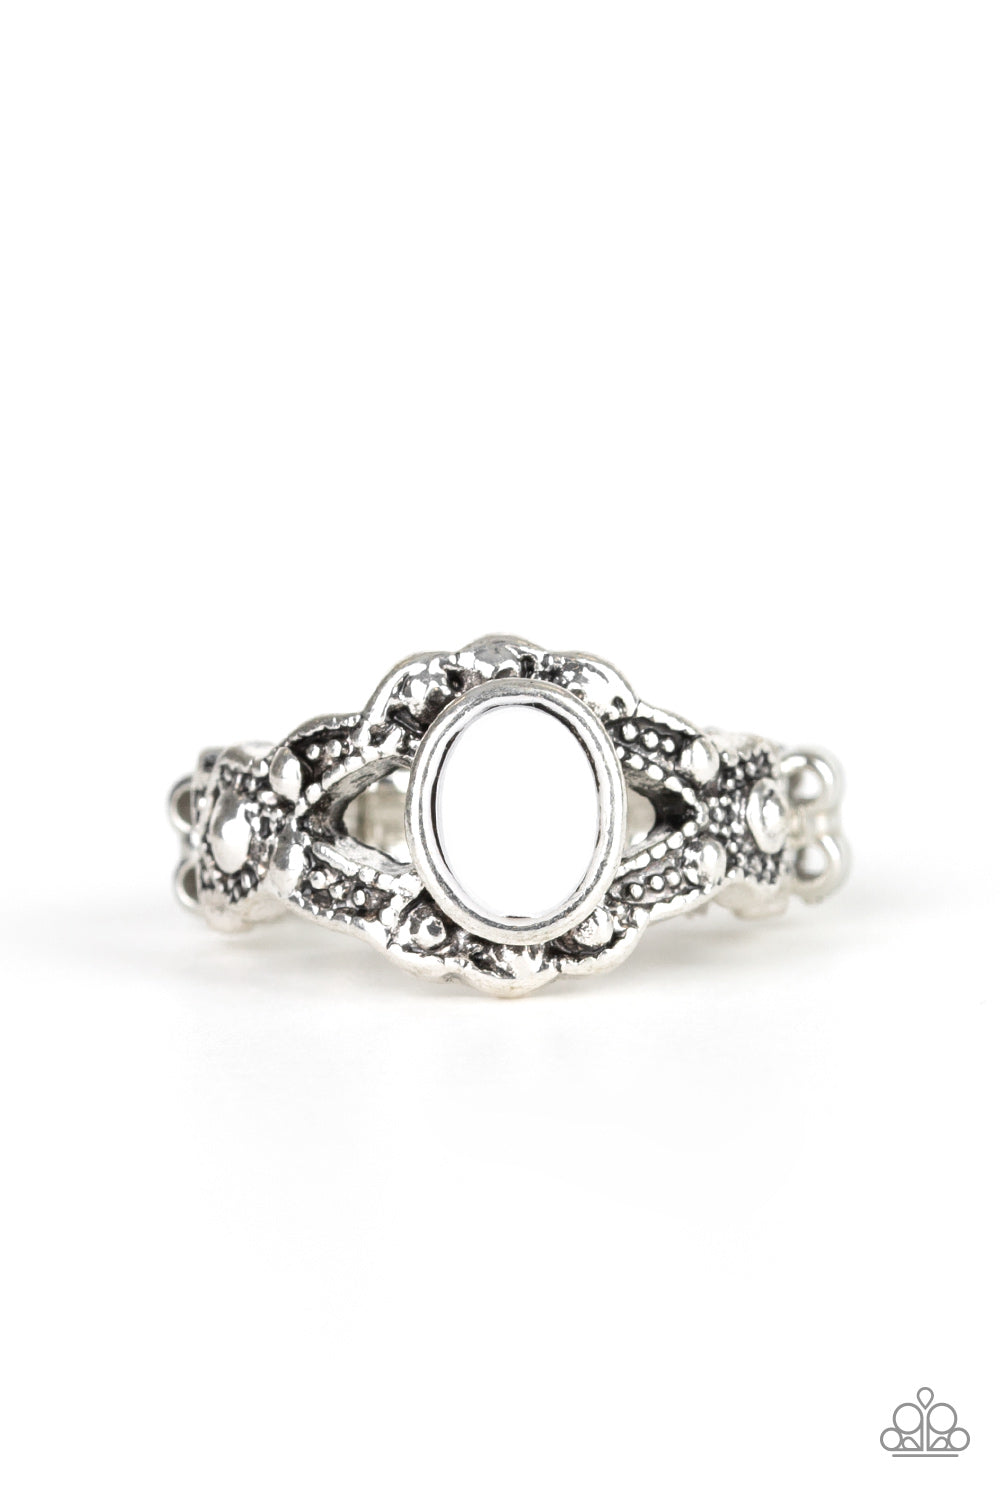 Definitely DOT! White Ring - Paparazzi Accessories  A shiny white bead dots the center of a dainty silver band radiating with studded texture for a whimsical look. Features a dainty stretchy band for a flexible fit.  All Paparazzi Accessories are lead free and nickel free!  Sold as one individual ring.